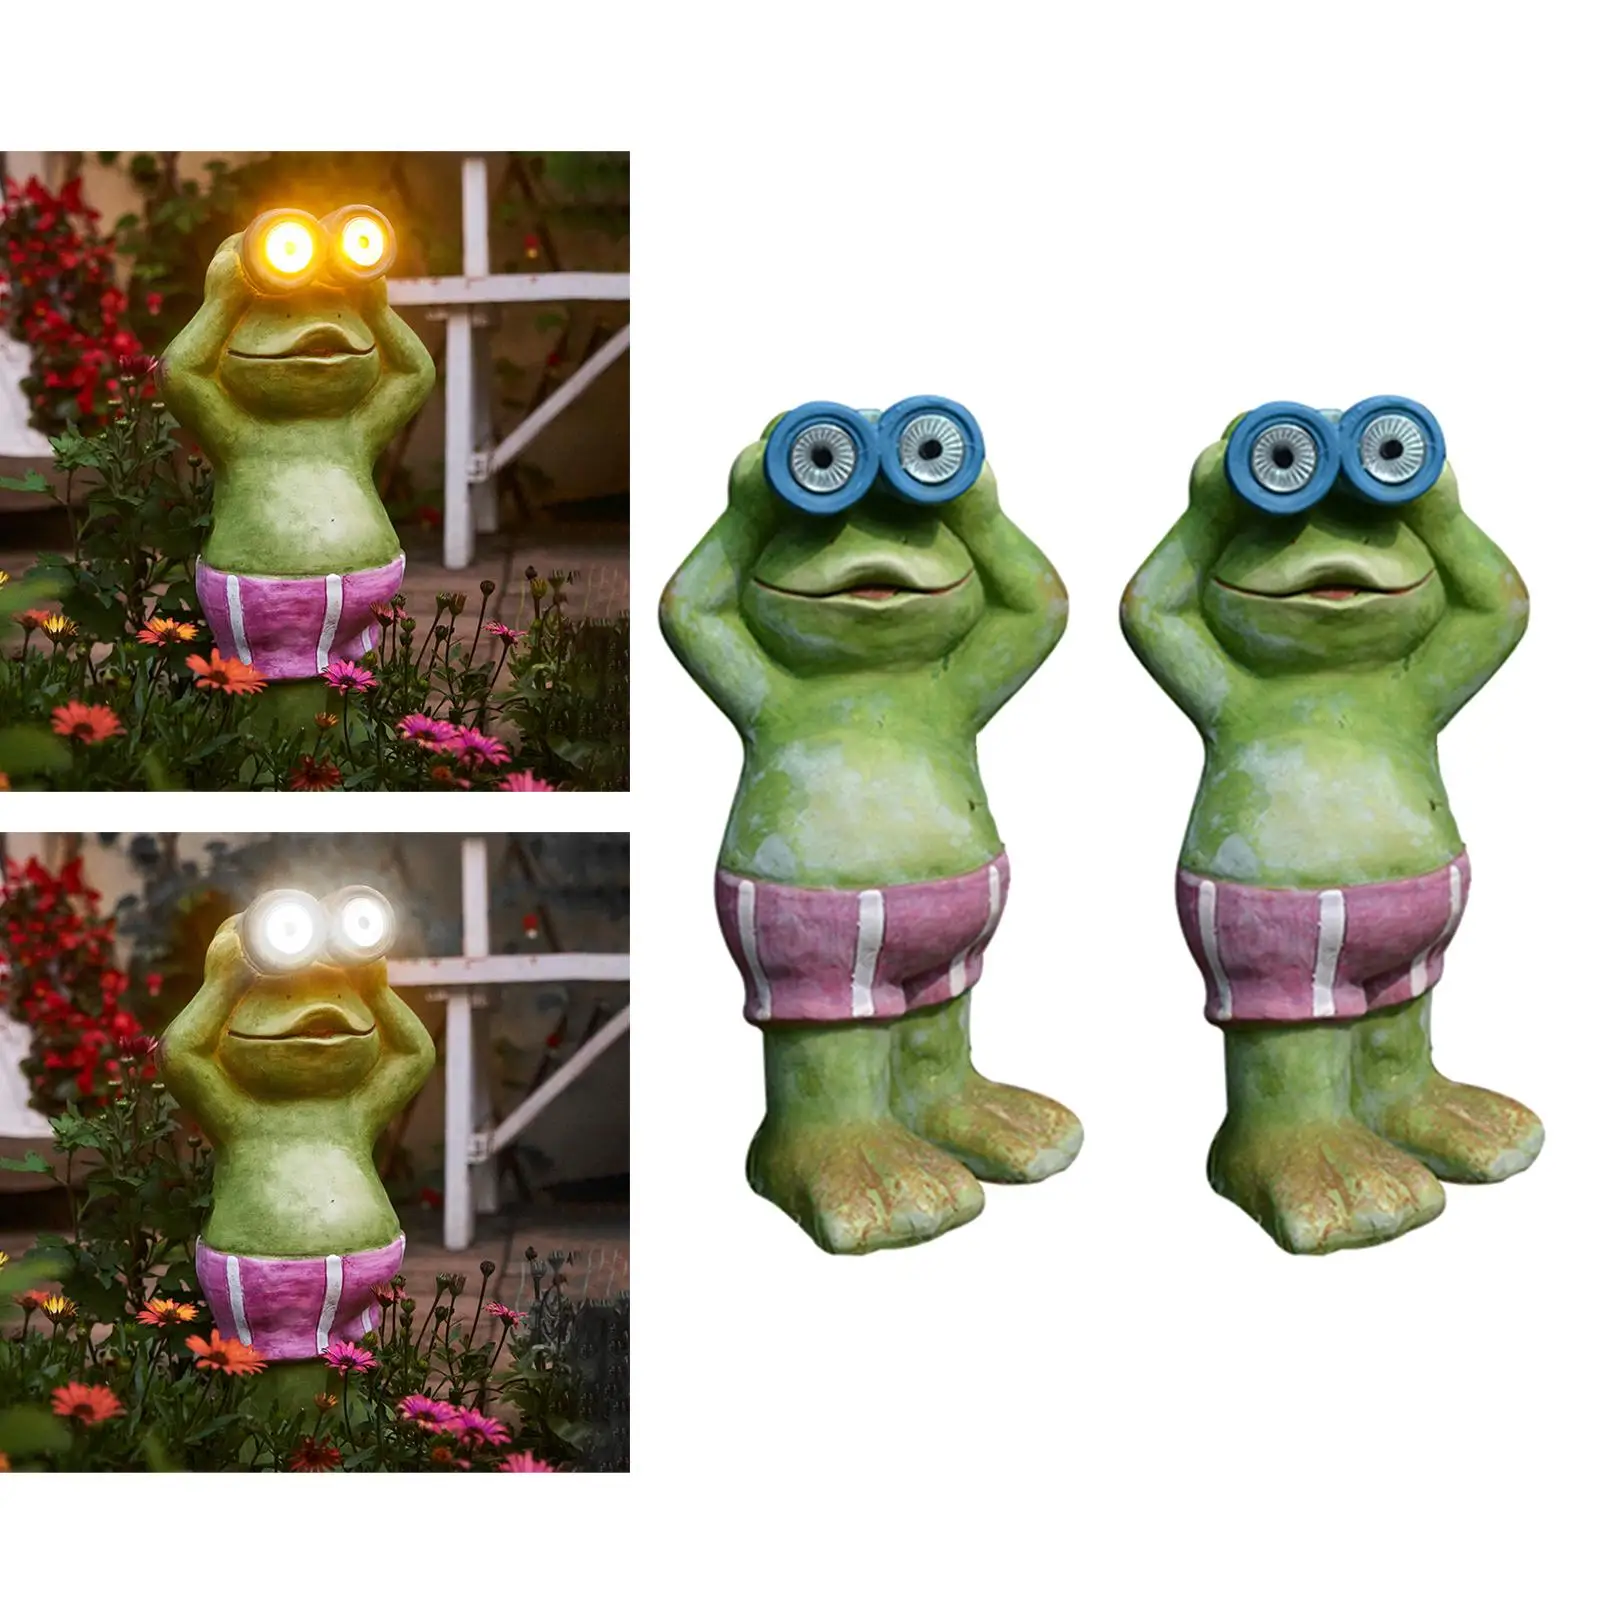 Resin Garden Lights Solar Powered Frog Shaped Stakes for Outdoor Walkway